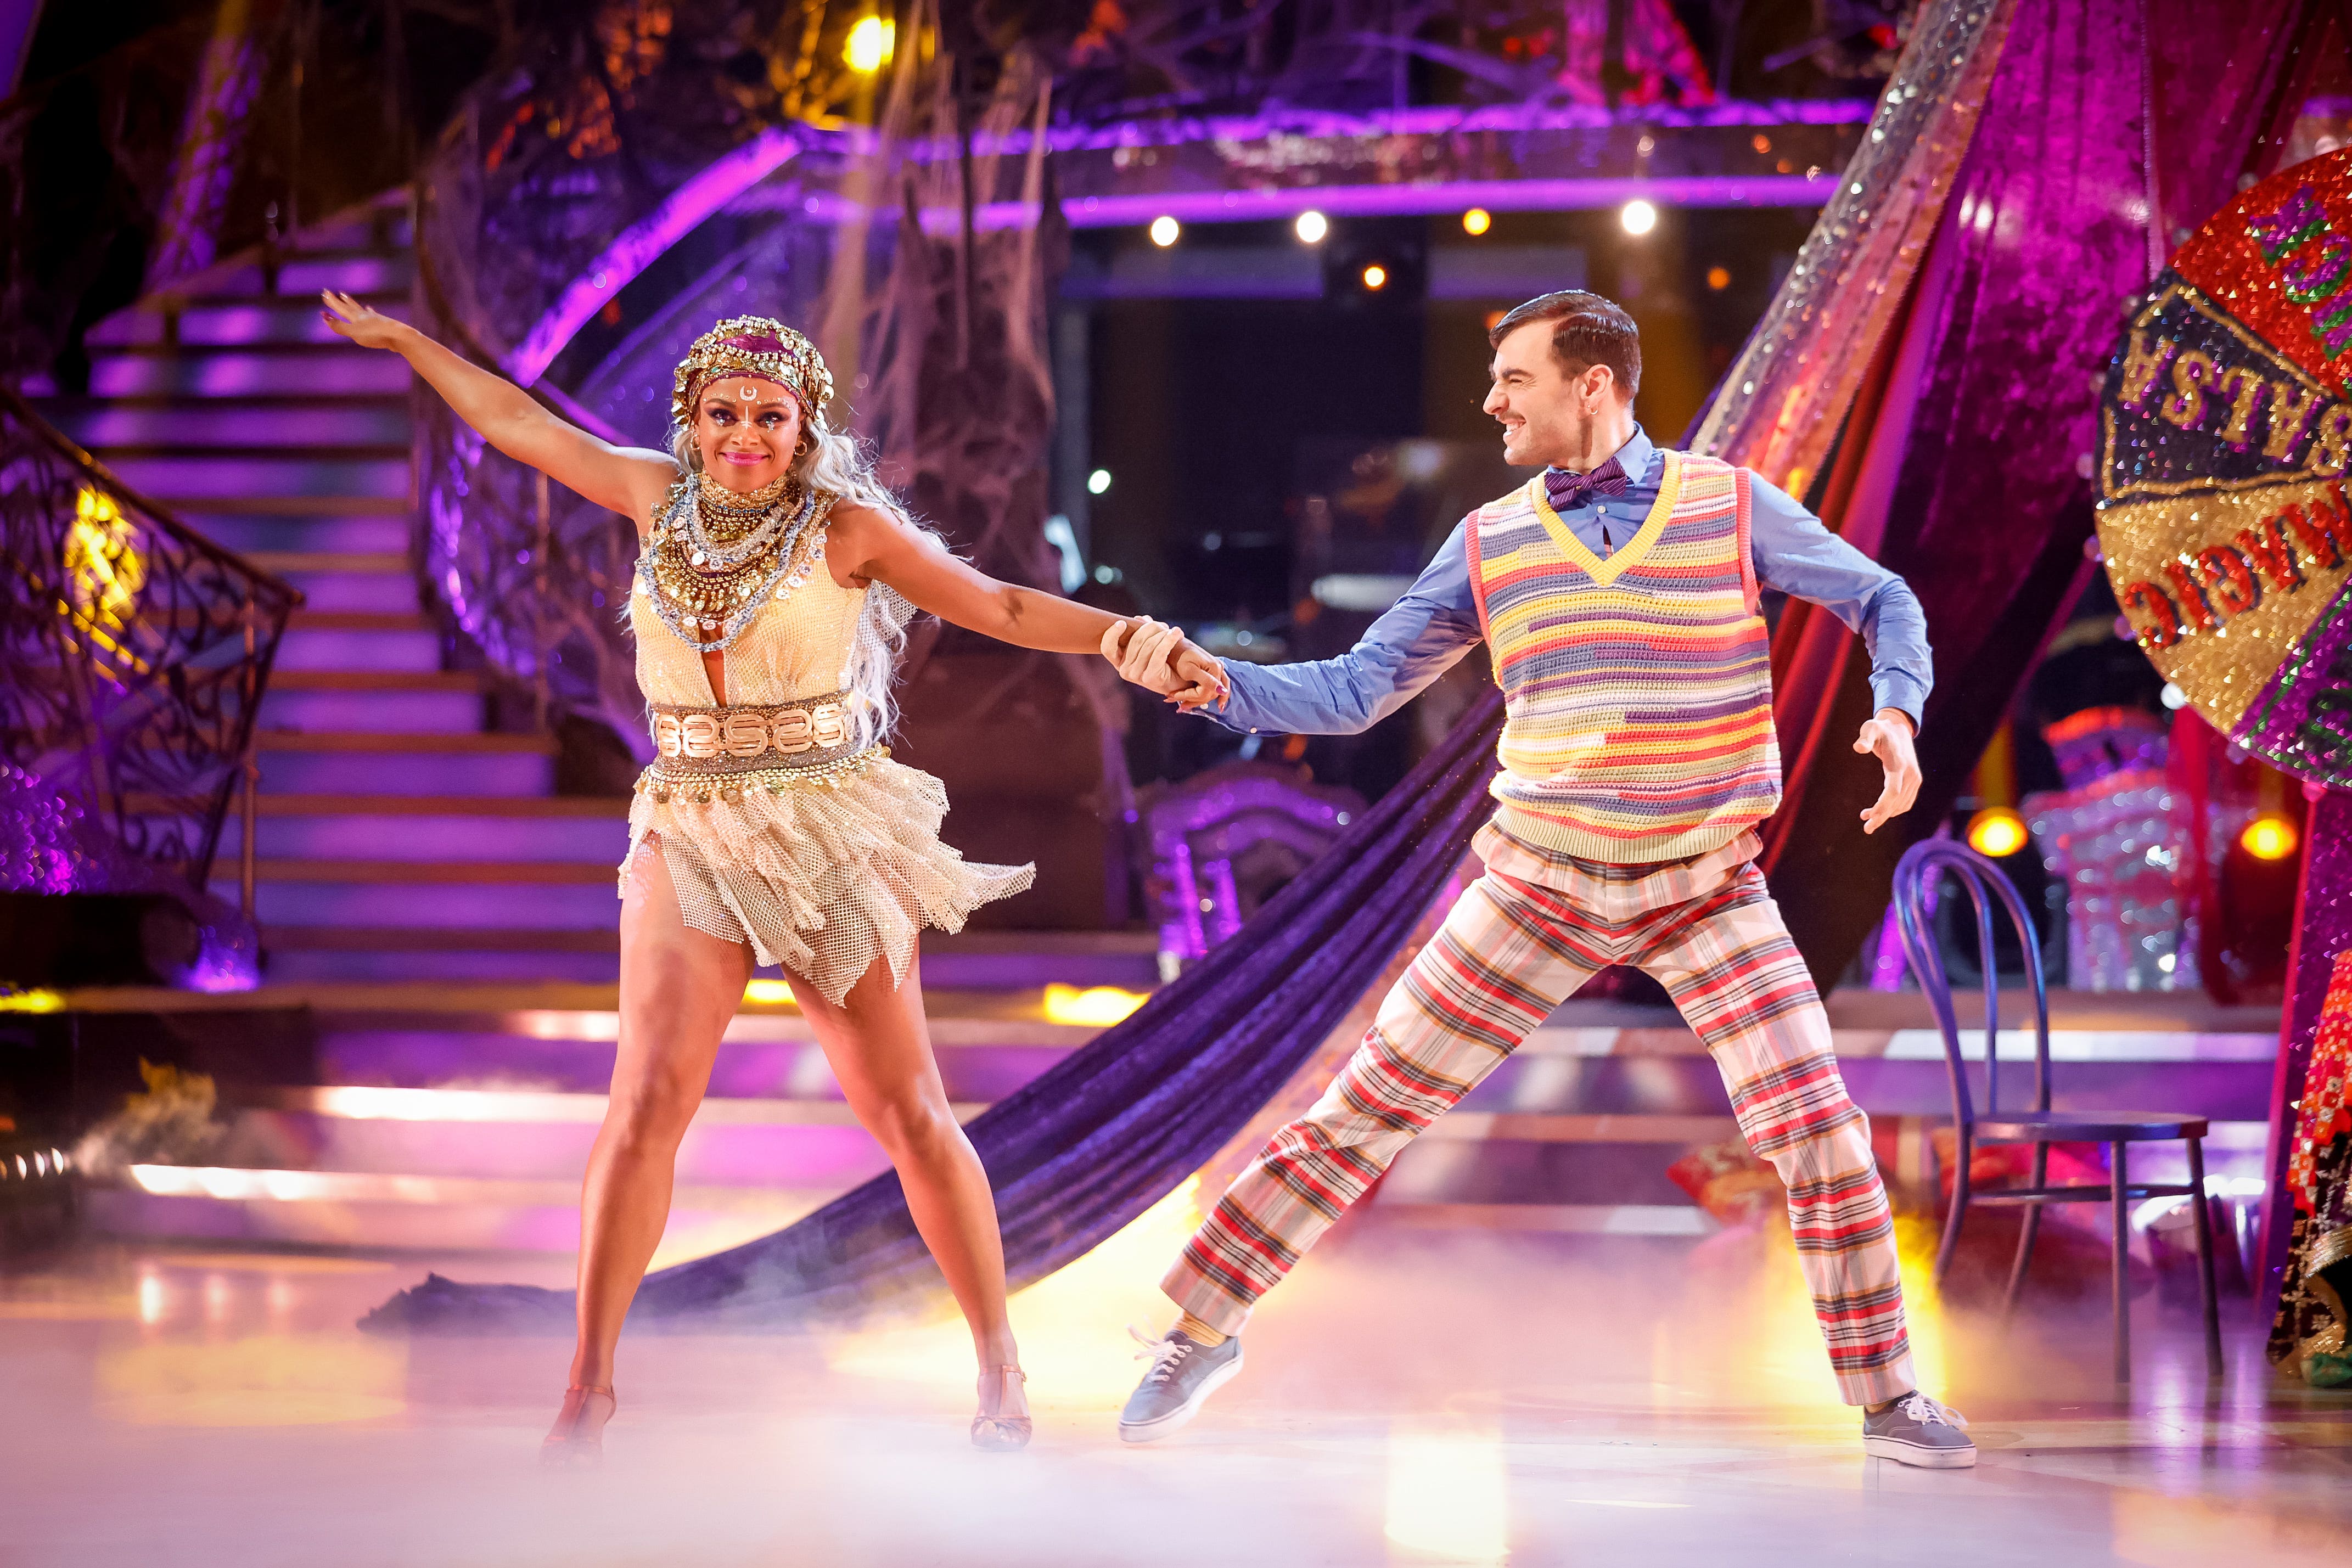 Fleur East was allowed to restart Strictly dance-off routine after prop incident